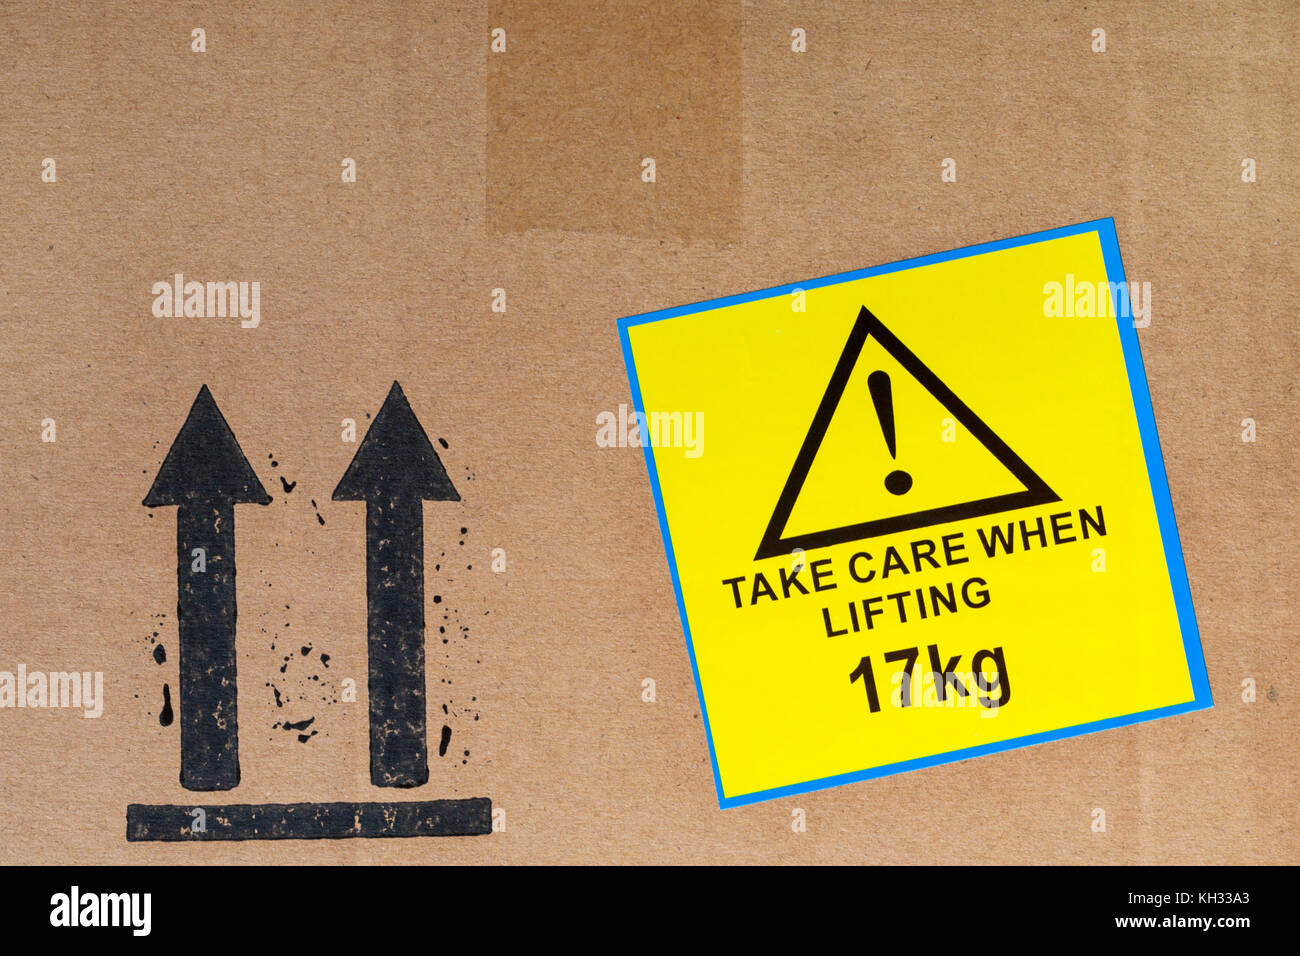 Take care when lifting 17kg yellow sticker label stuck on cardboard box and keep upright arrows symbol Stock Photo